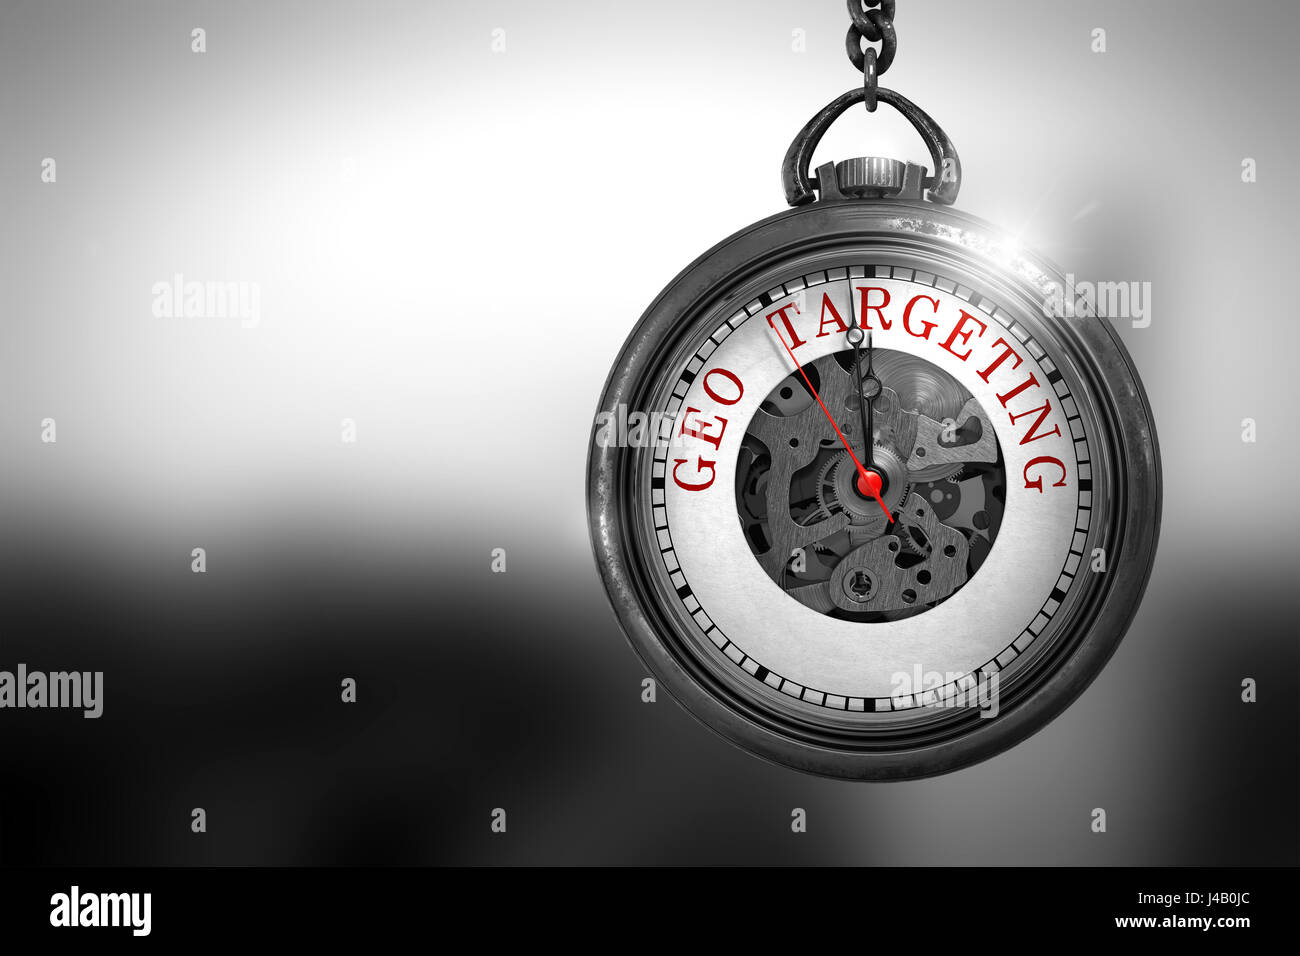 Geo Targeting on Pocket Watch Face. 3D Illustration. Stock Photo